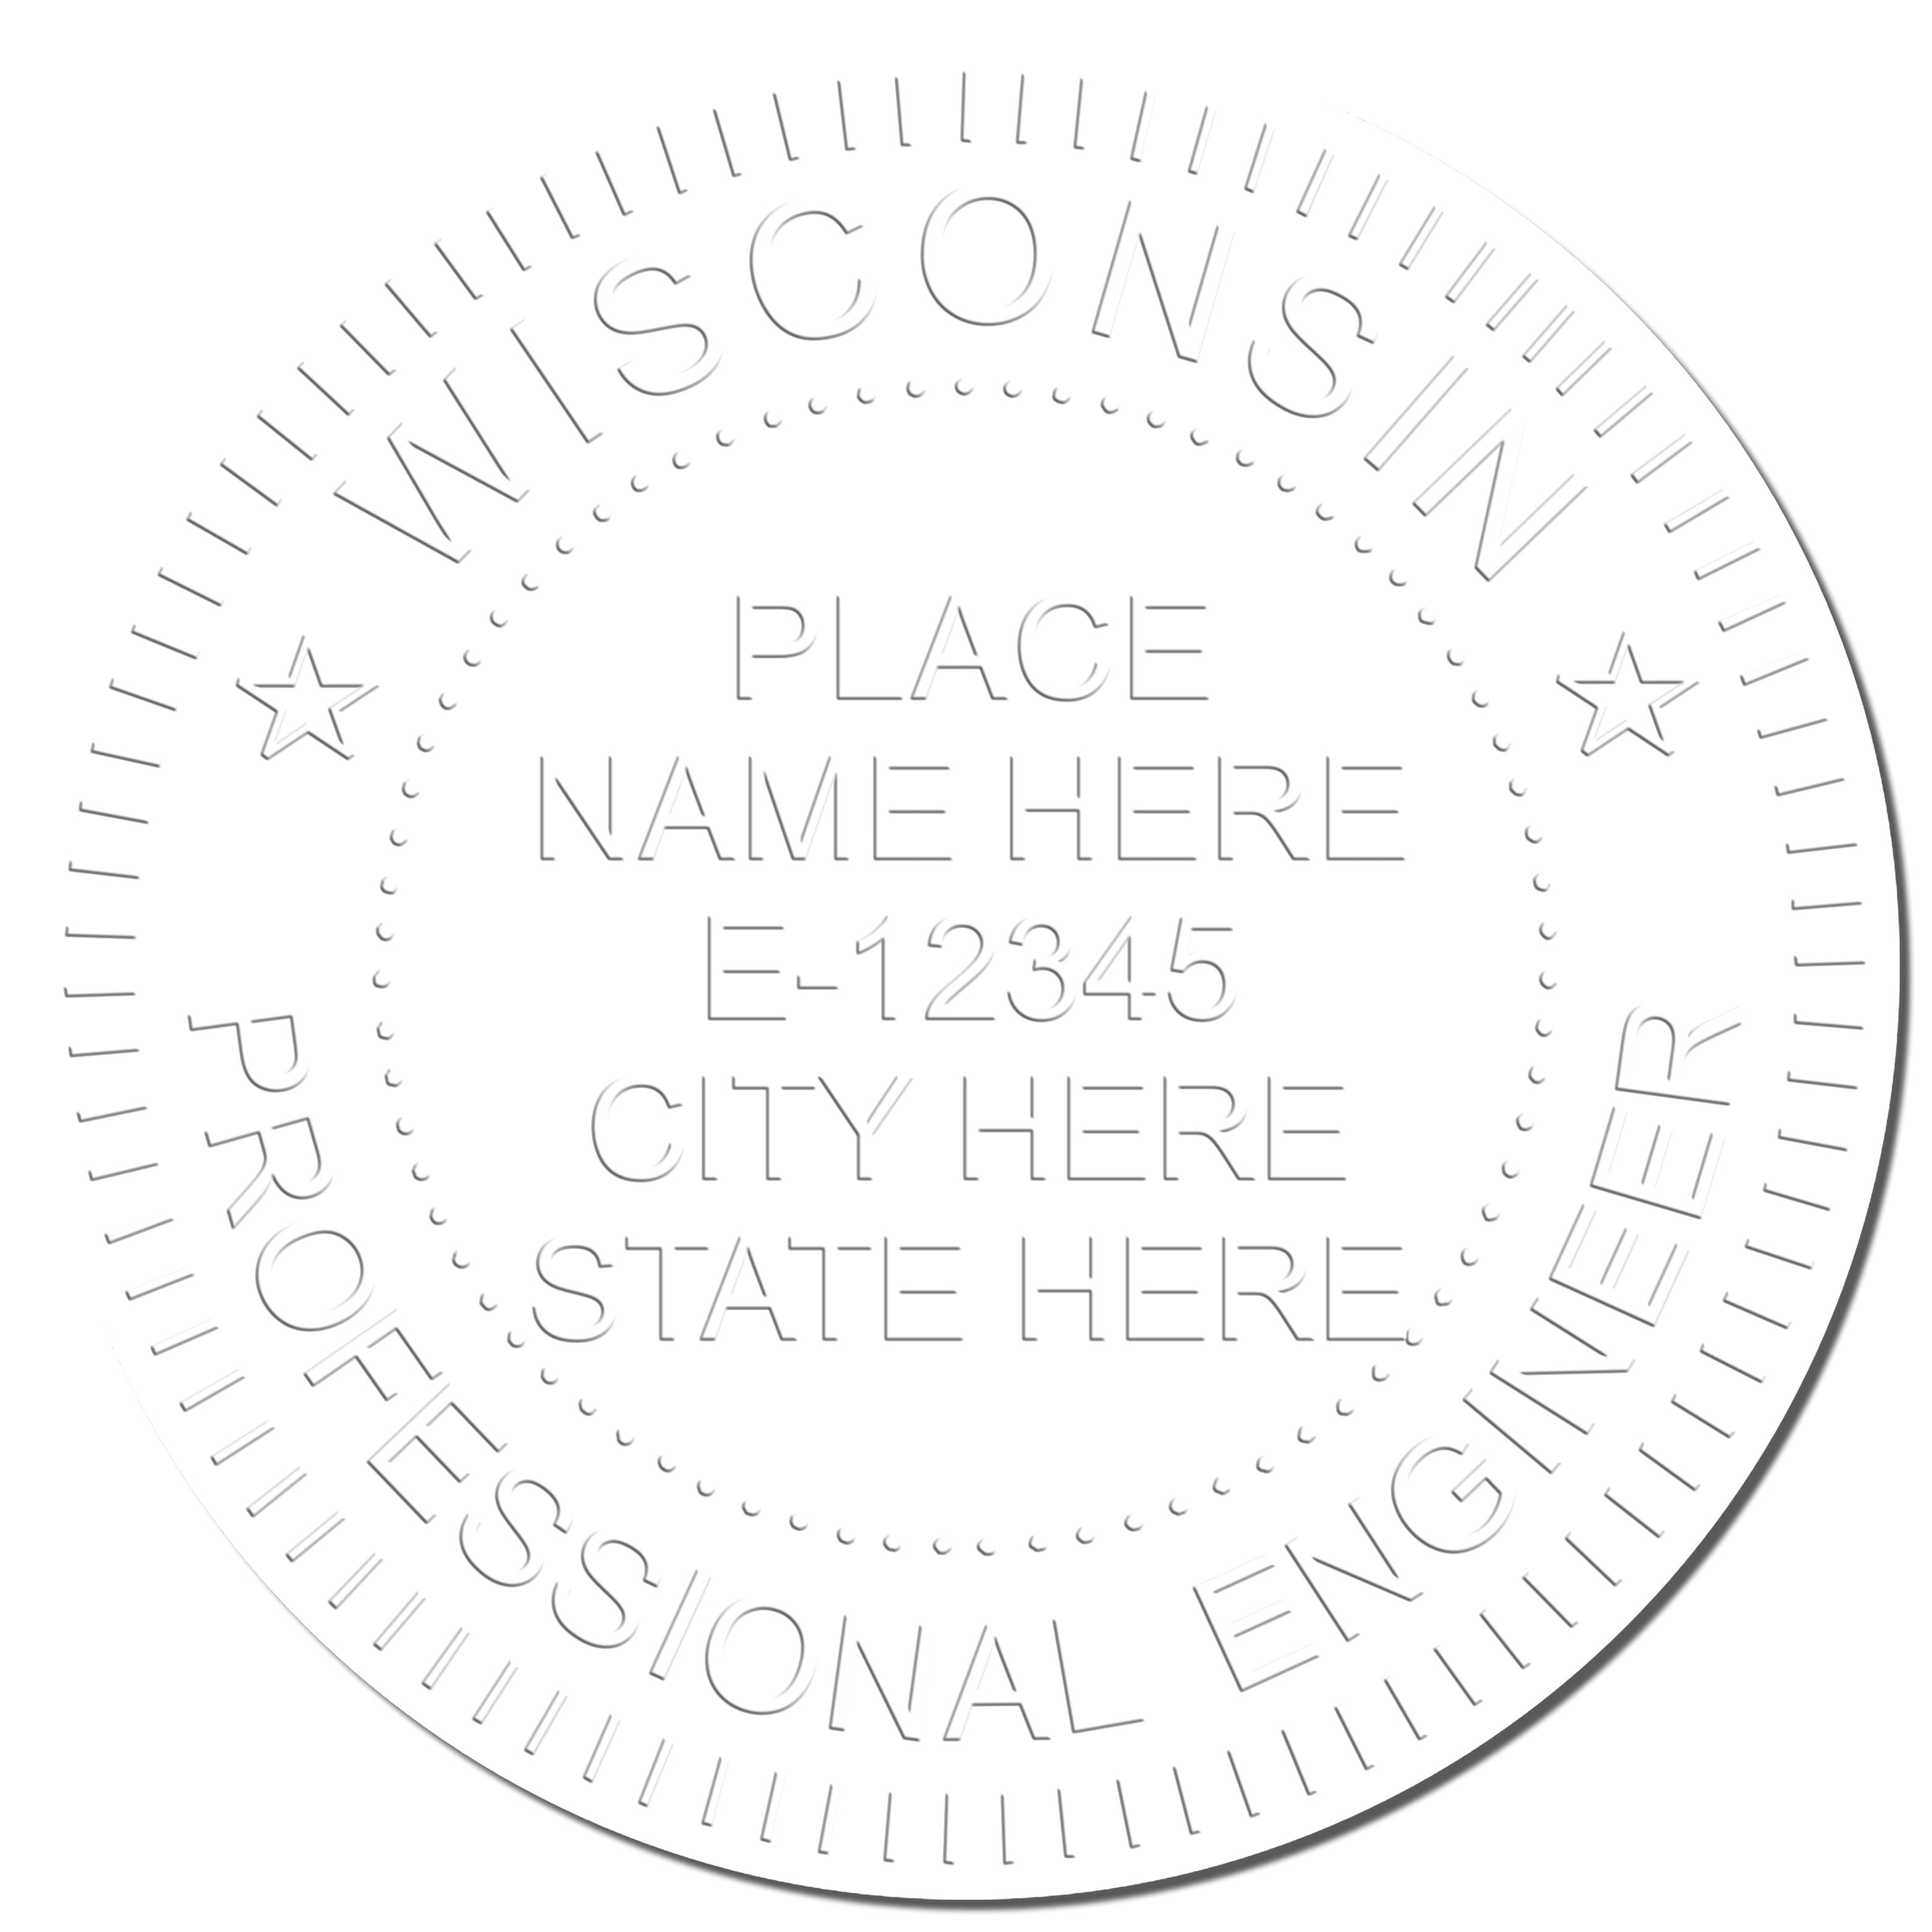 This paper is stamped with a sample imprint of the State of Wisconsin Extended Long Reach Engineer Seal, signifying its quality and reliability.